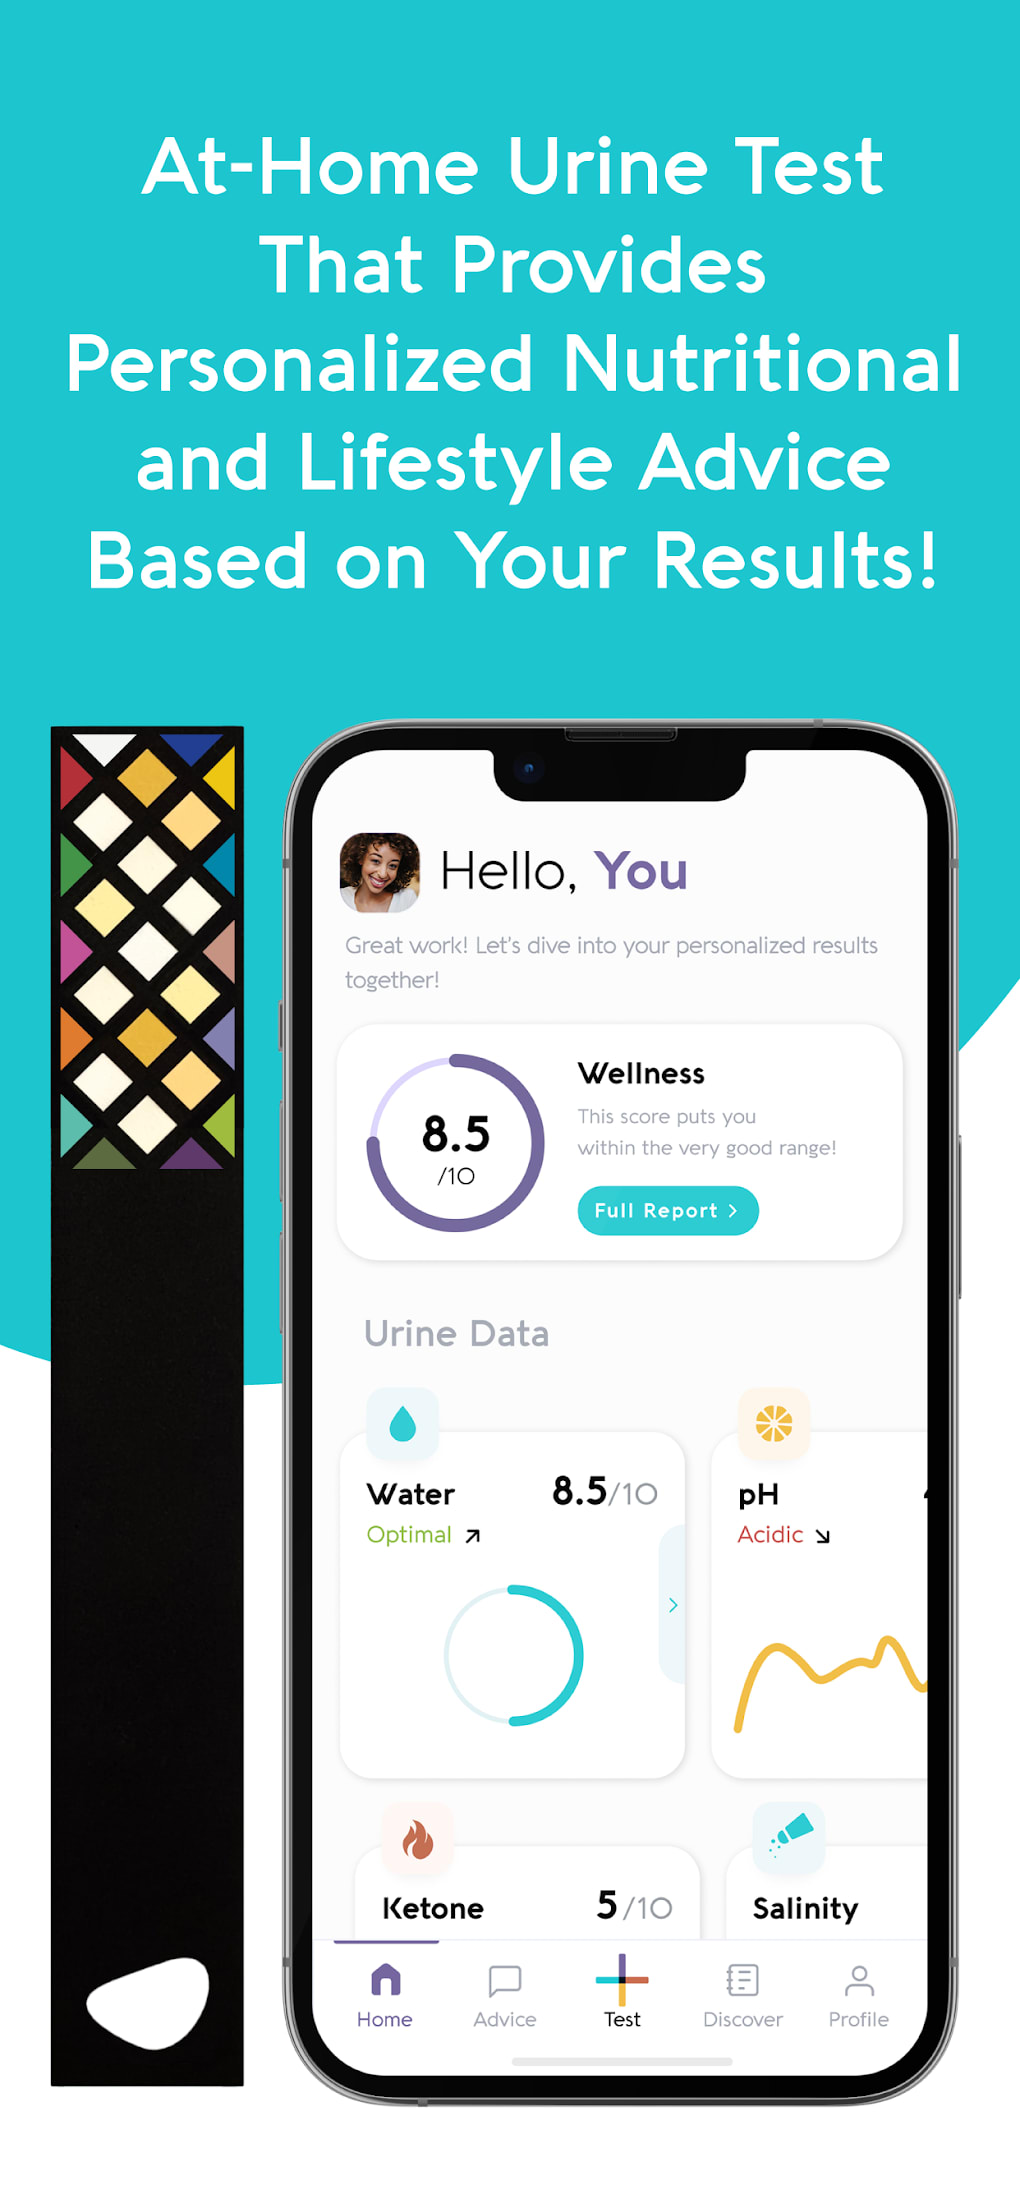 Review: Vivoo at-home urine test measures 9 wellness parameters